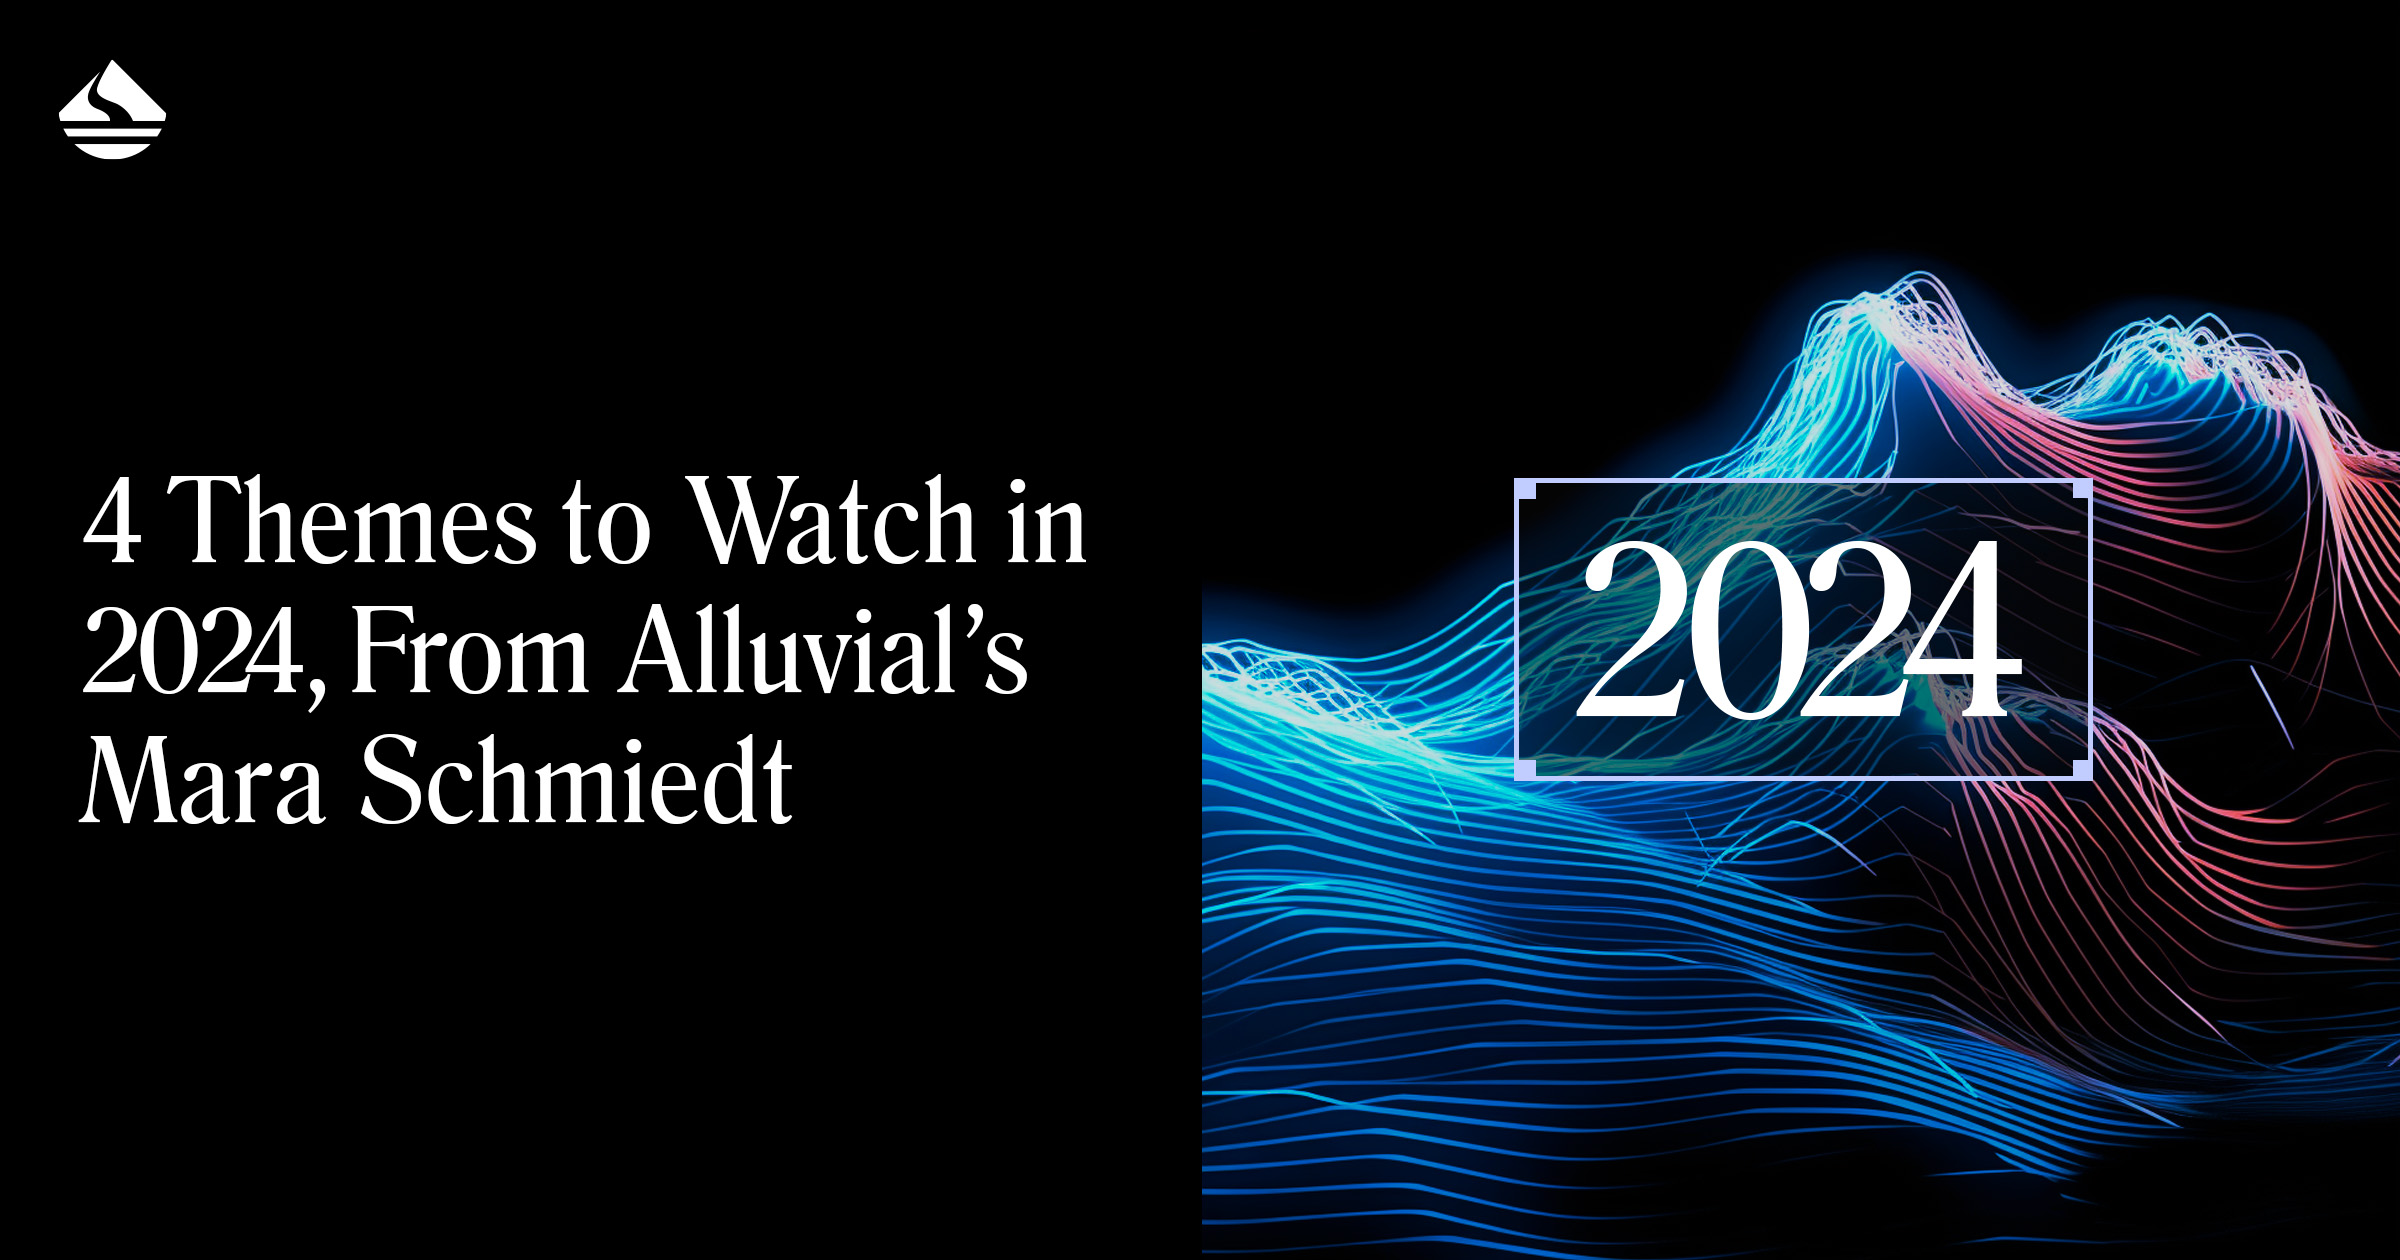 4 Themes to Watch in 2024, From Alluvial